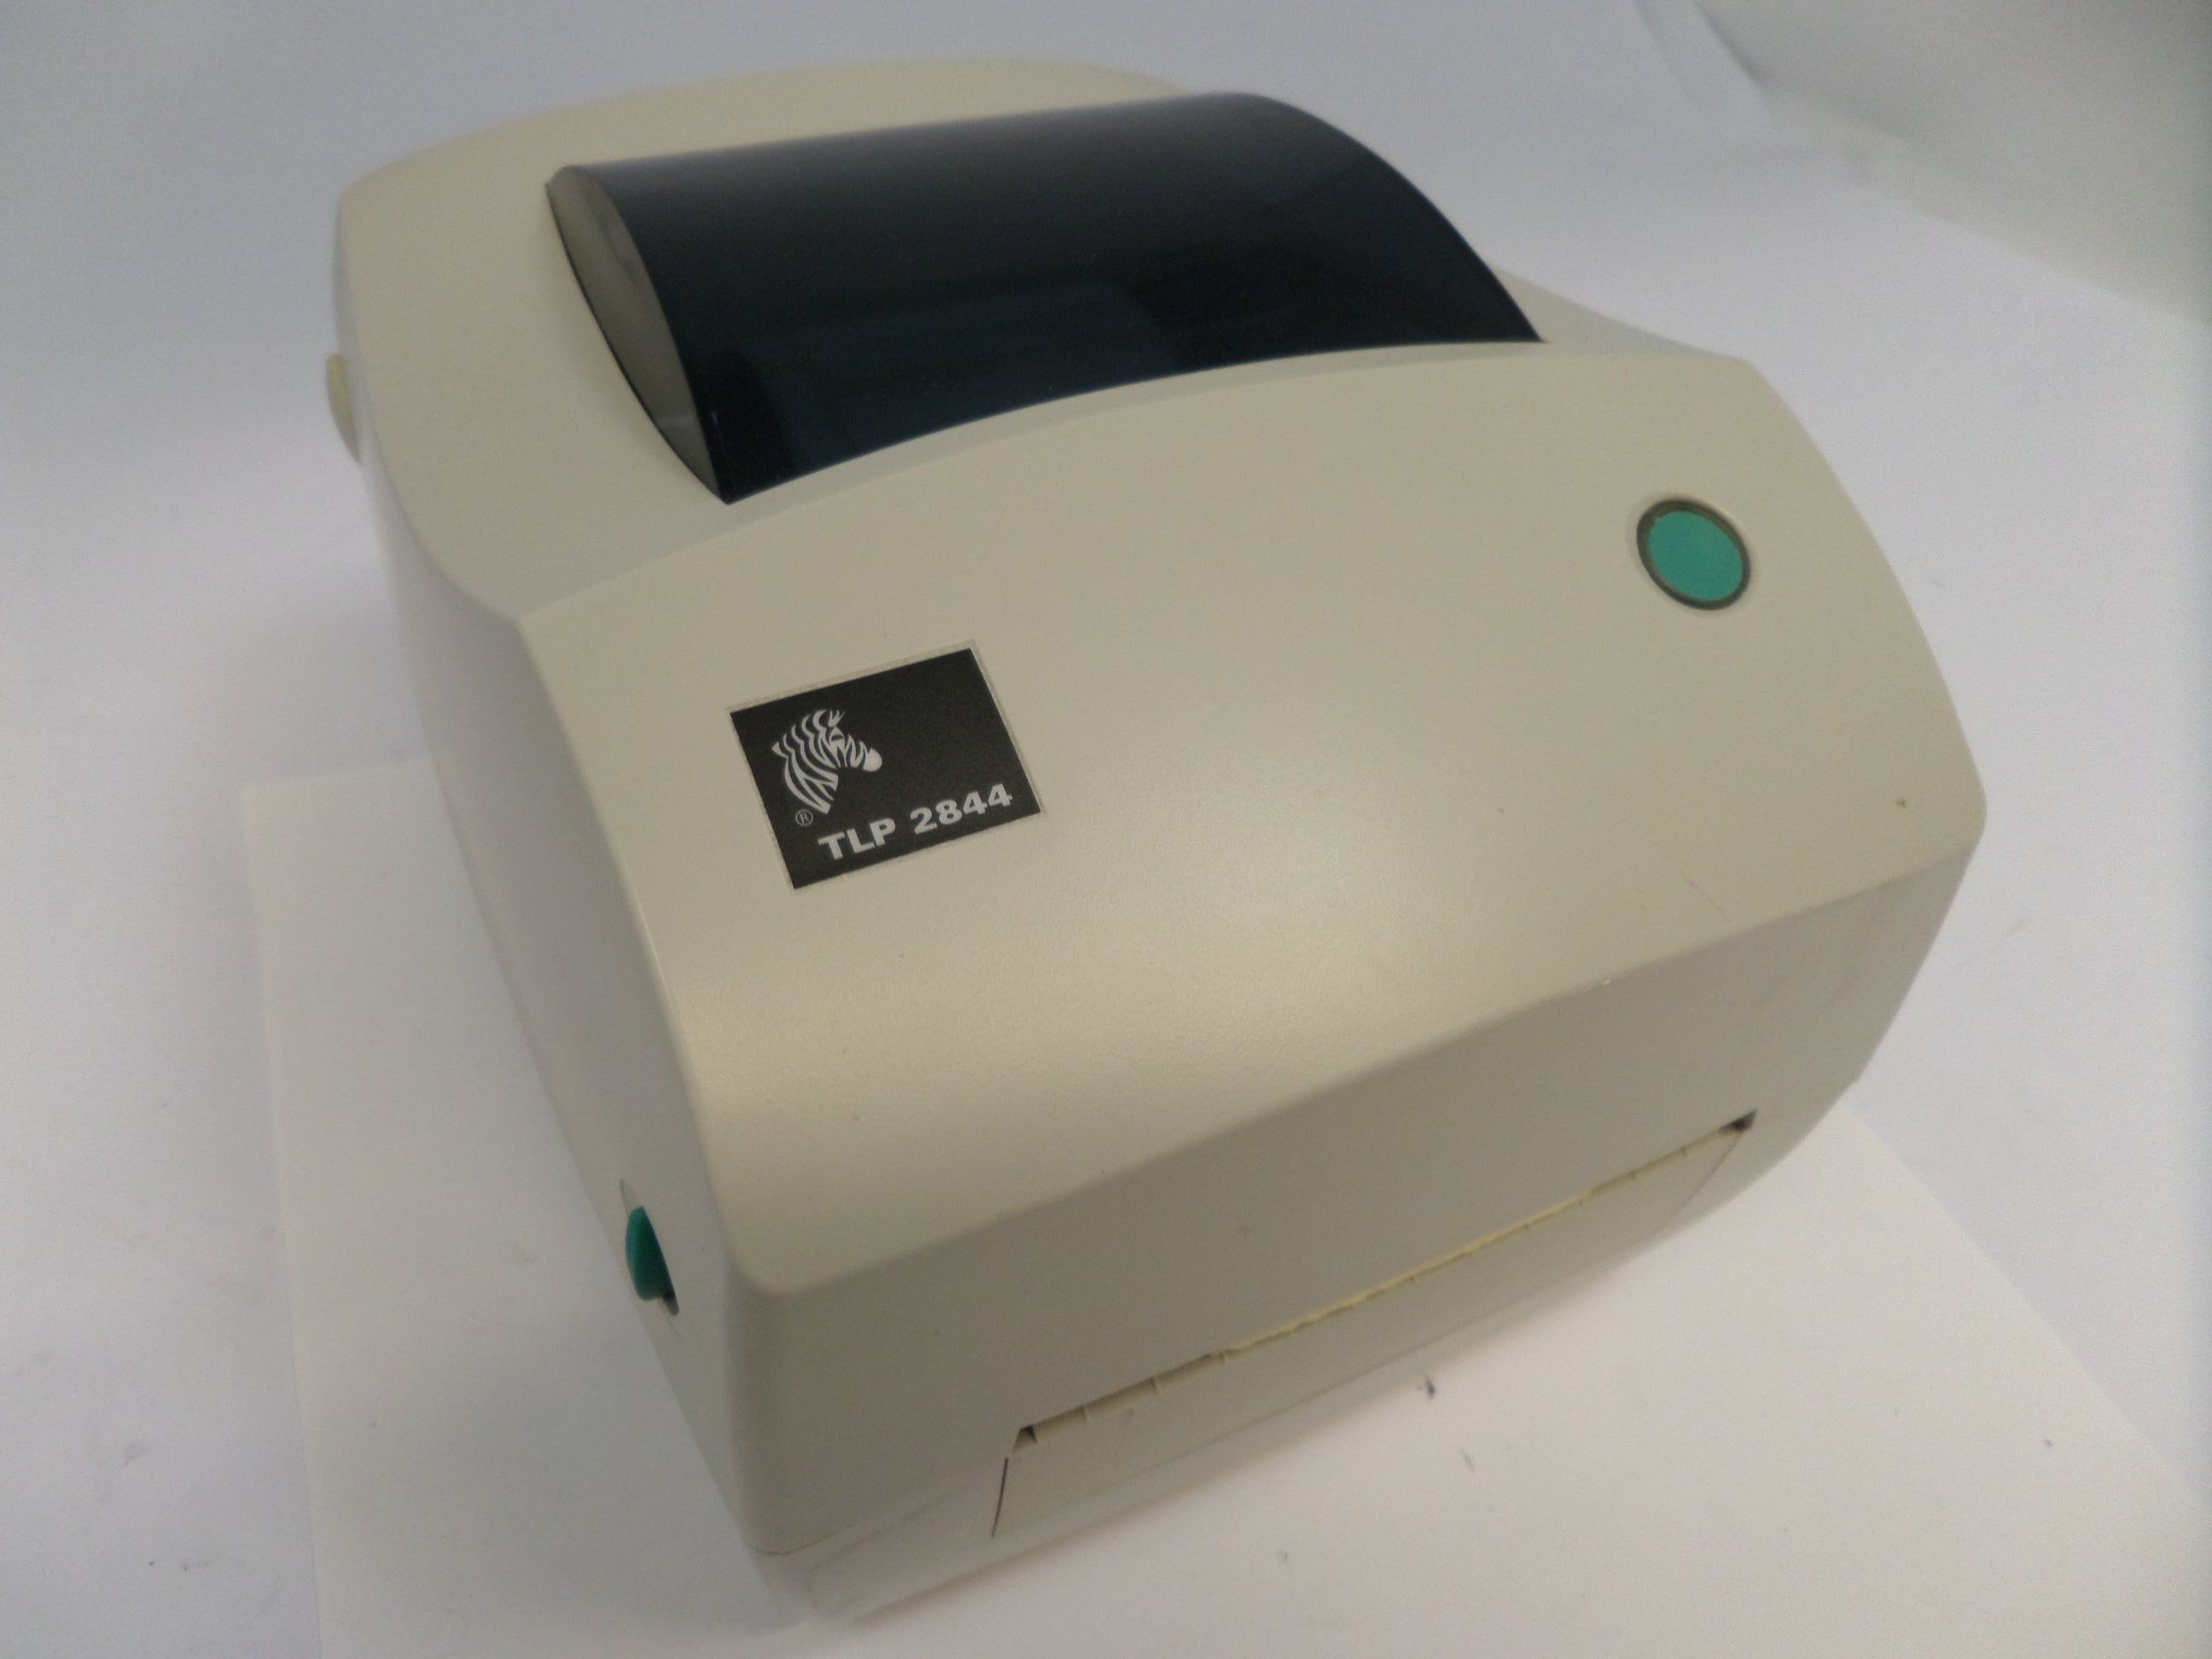 2844-10300-0001 - Zebra TLP 2844 Thermal Barcode Label Printer With USB Cable - Requires A 20V 2.5A PSU ( Not Supplied) - USED